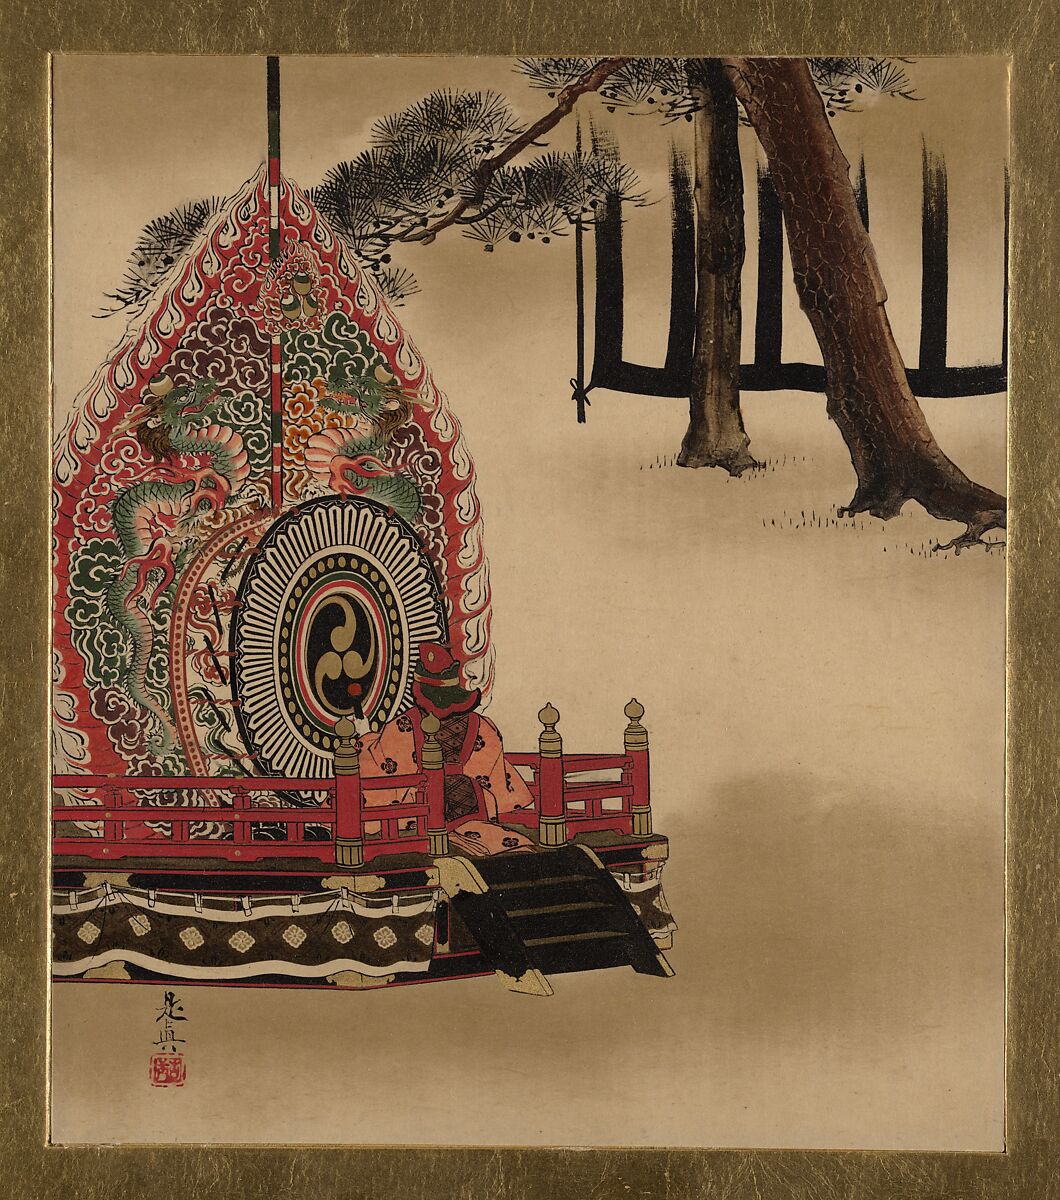 Lacquer Paintings of Various Subjects: Drum for Gagaku Dance, Shibata Zeshin (Japanese, 1807–1891), Lacquer on paper, Japan 